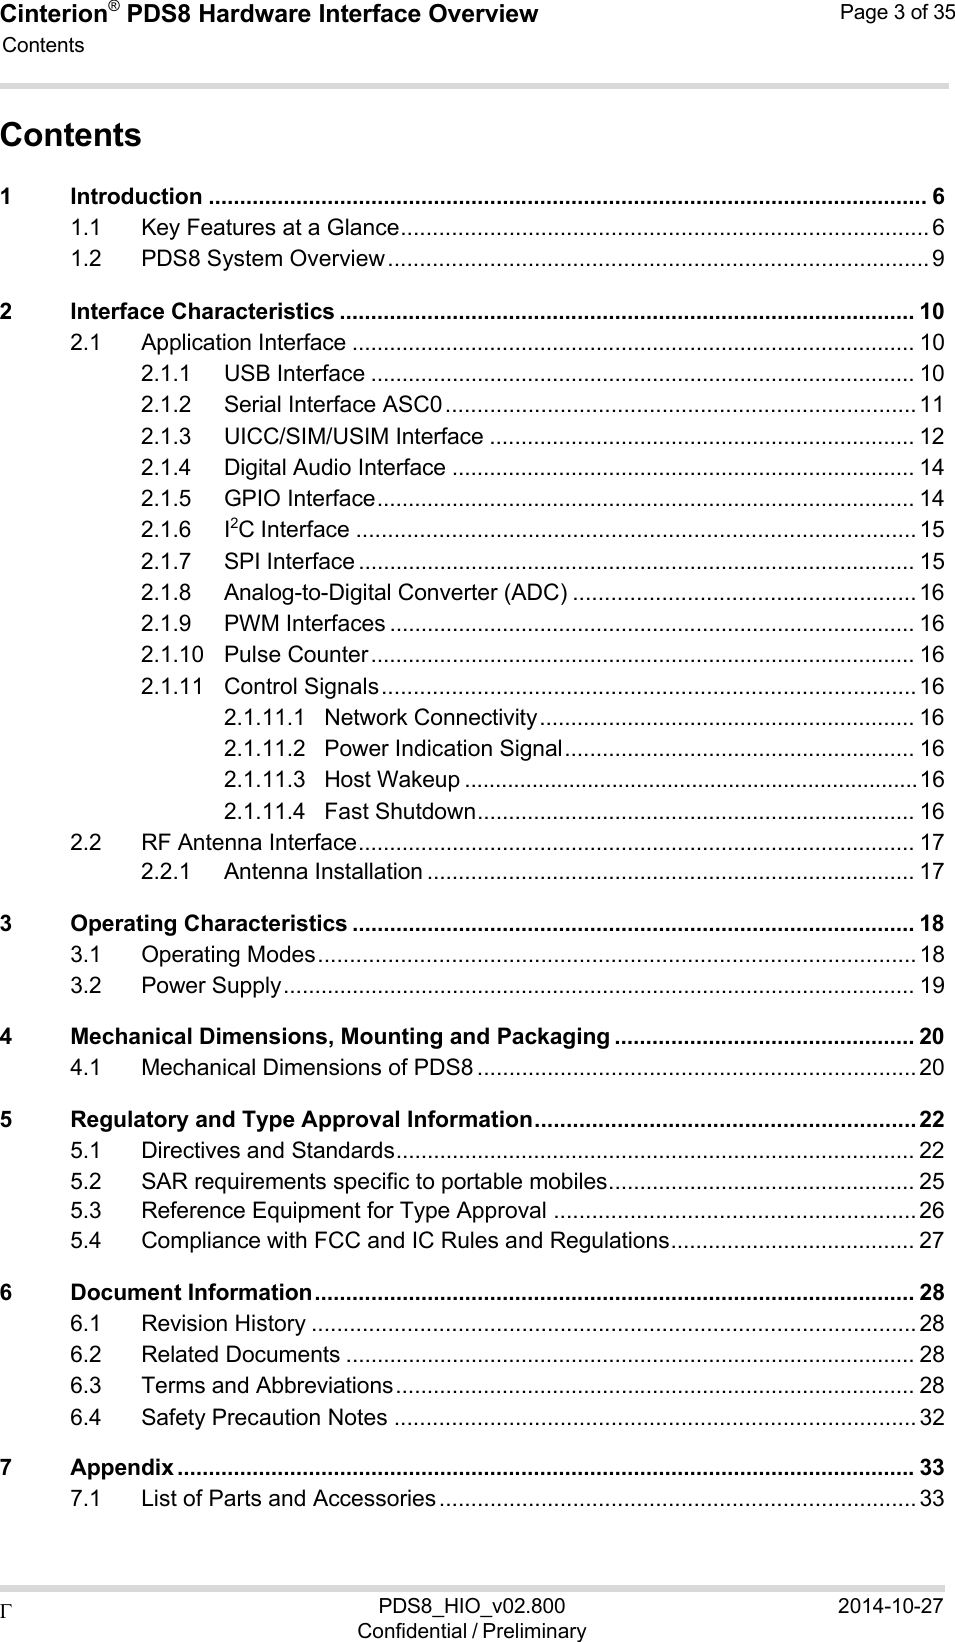 Cinterion®  PDS8 Hardware Interface Overview Page 3 of 35 PDS8_HIO_v02.800Confidential / Preliminary2014-10-27  Contents    Contents 1 Introduction ................................................................................................................... 6 1.1 Key Features at a Glance ................................................................................... 6 1.2 PDS8 System Overview ..................................................................................... 9 2 Interface Characteristics ............................................................................................ 10 2.1 Application Interface .......................................................................................... 10 2.1.1 USB Interface ....................................................................................... 10 2.1.2 Serial Interface ASC0 .......................................................................... 11 2.1.3 UICC/SIM/USIM Interface .................................................................... 12 2.1.4 Digital Audio Interface .......................................................................... 14 2.1.5 GPIO Interface ...................................................................................... 14 2.1.6 I2C Interface ........................................................................................ 15 2.1.7 SPI Interface ......................................................................................... 15 2.1.8 Analog-to-Digital Converter (ADC) ...................................................... 16 2.1.9 PWM Interfaces .................................................................................... 16 2.1.10 Pulse Counter ....................................................................................... 16 2.1.11 Control Signals .................................................................................... 16 2.1.11.1 Network Connectivity ............................................................ 16 2.1.11.2 Power Indication Signal ........................................................ 16 2.1.11.3 Host Wakeup .......................................................................... 16 2.1.11.4 Fast Shutdown ...................................................................... 16 2.2 RF Antenna Interface ......................................................................................... 17 2.2.1 Antenna Installation .............................................................................. 17 3 Operating Characteristics .......................................................................................... 18 3.1 Operating Modes .............................................................................................. 18 3.2 Power Supply ..................................................................................................... 19 4 Mechanical Dimensions, Mounting and Packaging ................................................ 20 4.1 Mechanical Dimensions of PDS8 ..................................................................... 20 5 Regulatory and Type Approval Information ............................................................ 22 5.1 Directives and Standards ................................................................................... 22 5.2 SAR requirements specific to portable mobiles ................................................. 25 5.3 Reference Equipment for Type Approval ......................................................... 26 5.4 Compliance with FCC and IC Rules and Regulations ....................................... 27 6 Document Information ................................................................................................ 28 6.1 Revision History ............................................................................................... 28 6.2 Related Documents ........................................................................................... 28 6.3 Terms and Abbreviations ................................................................................... 28 6.4 Safety Precaution Notes .................................................................................. 32 7 Appendix ...................................................................................................................... 33 7.1 List of Parts and Accessories ........................................................................... 33 